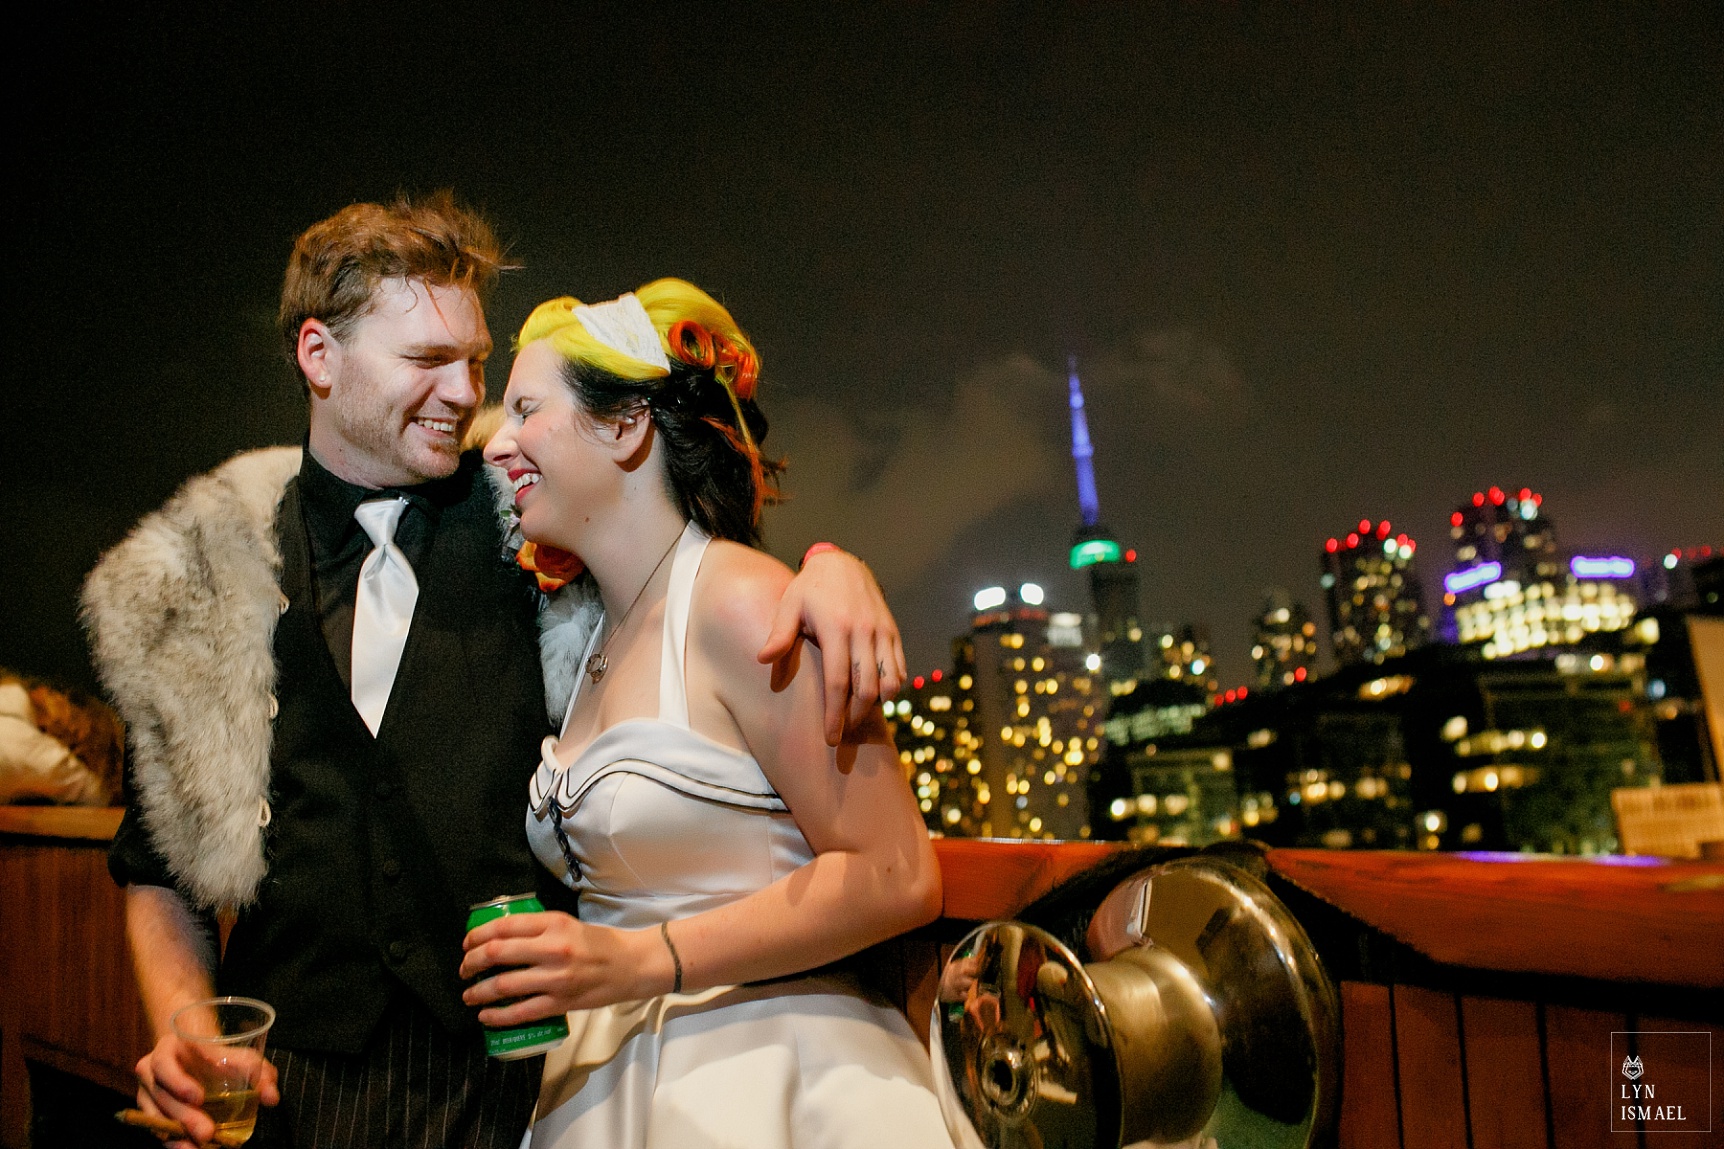 Bride and groom portrait at night with the Toronto skyline in the background.